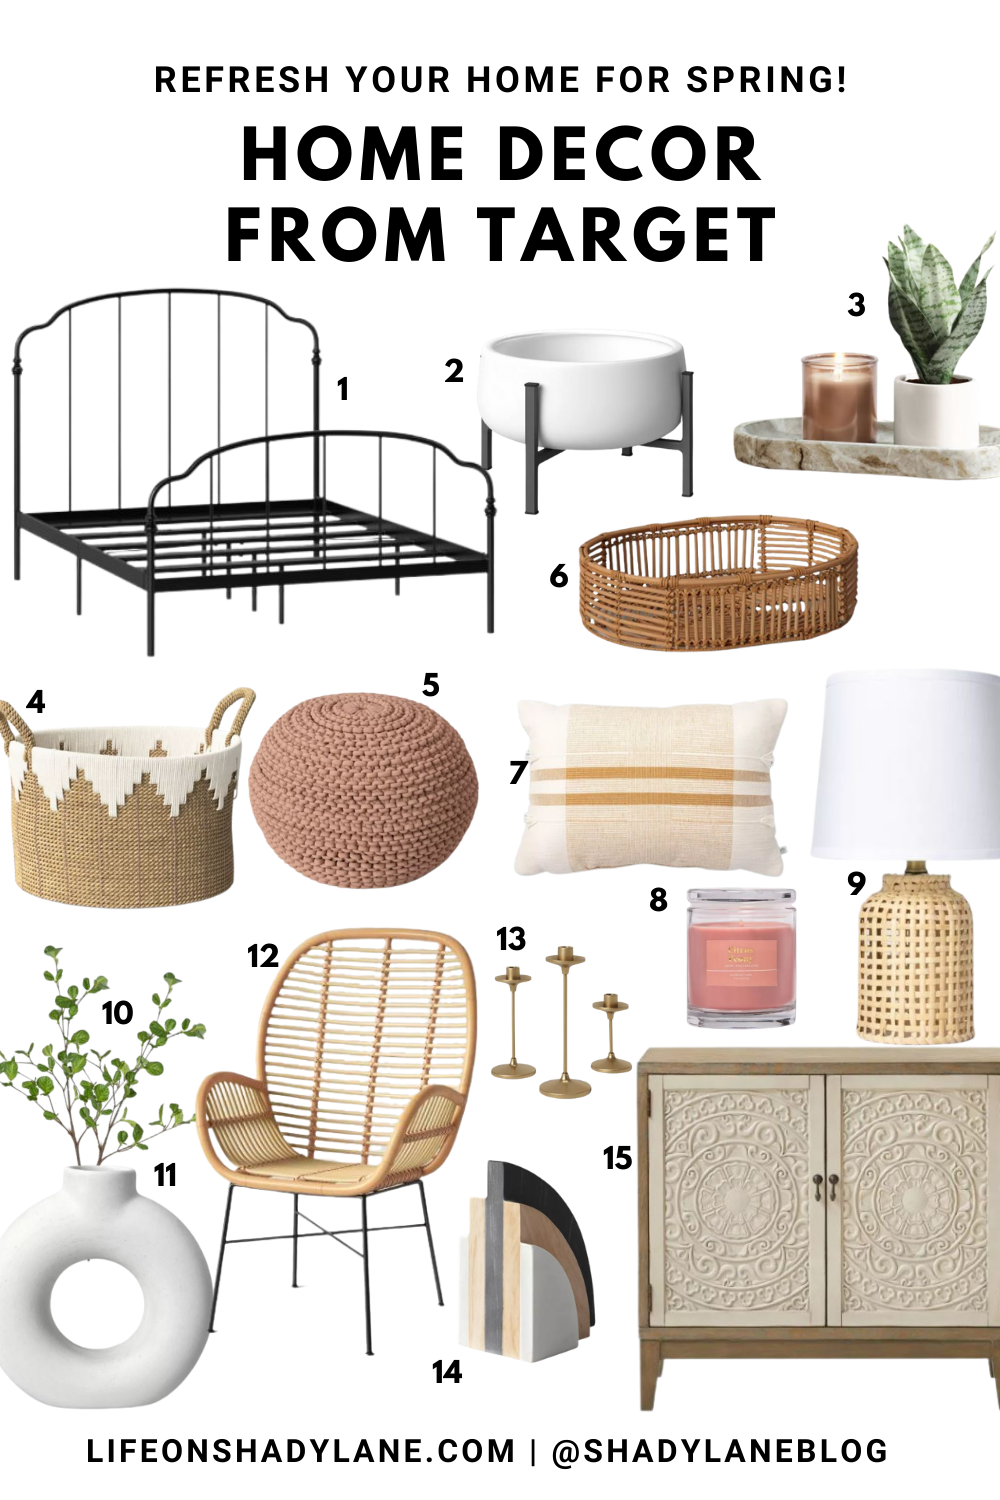 Home Decor from Target - Life on Shady Lane | Refresh your space!